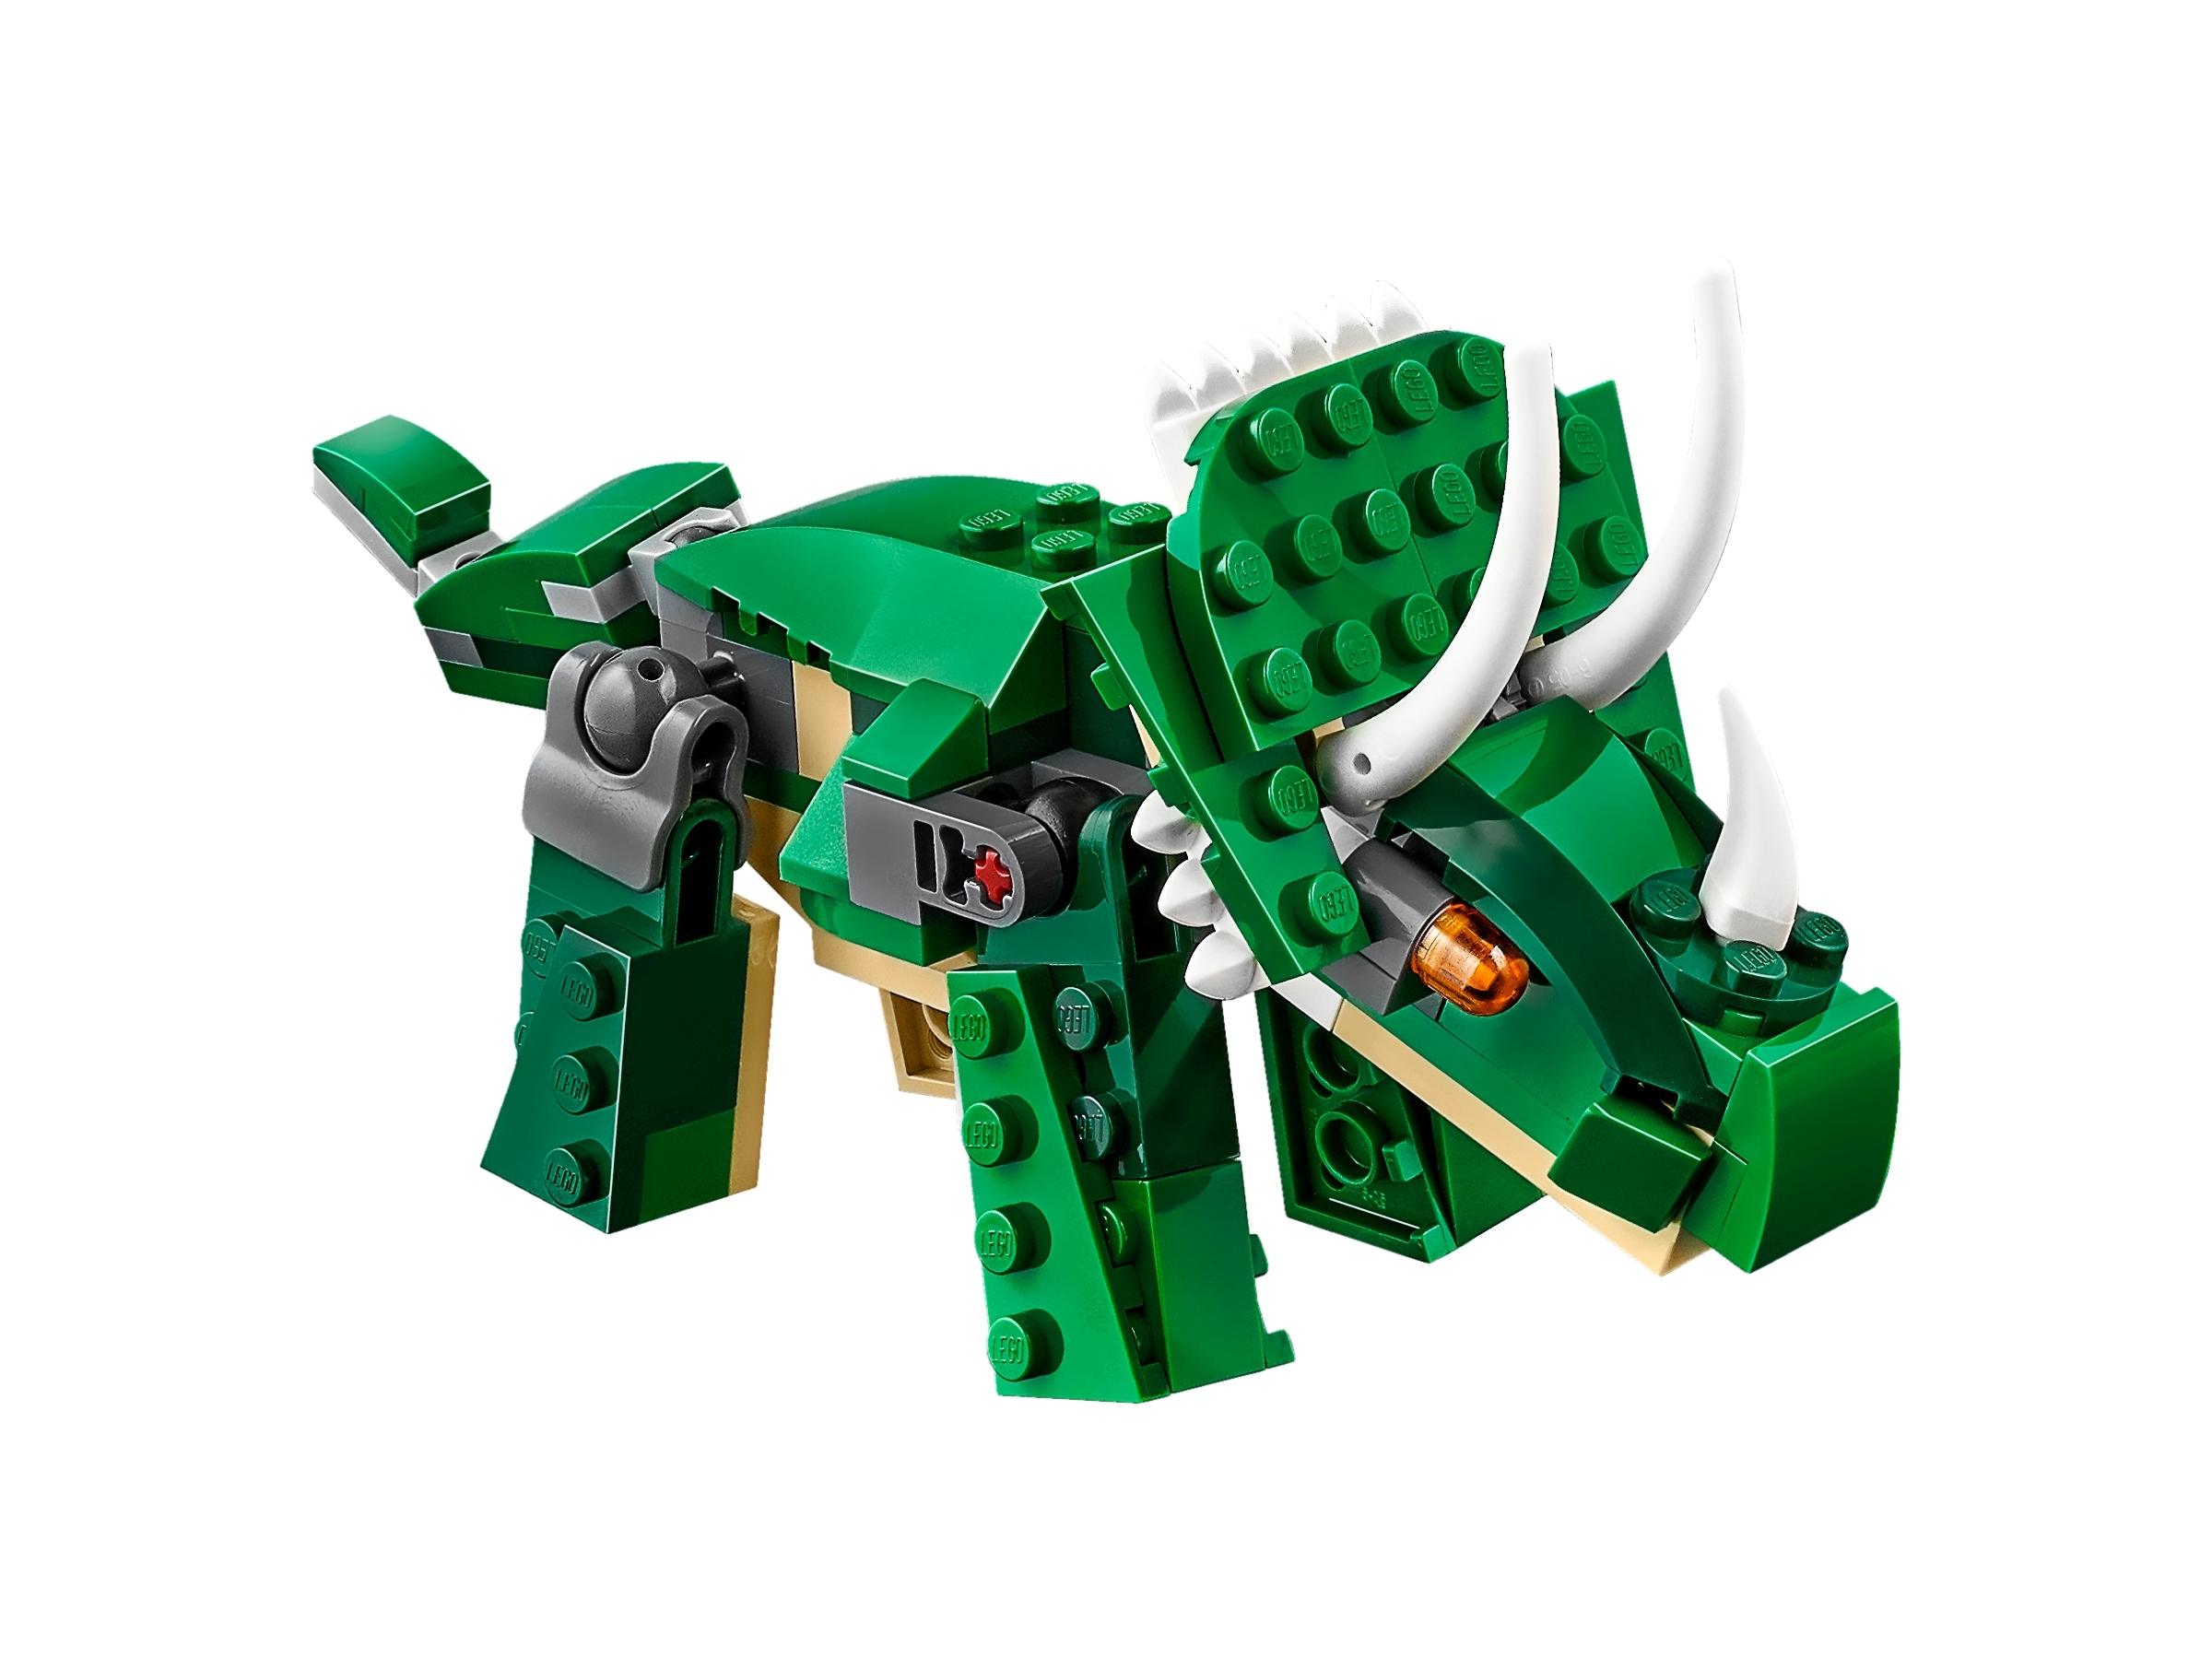 Dragon modification from LEGO Mighty Dinosaurs set, 31058 - Beyond Blocks